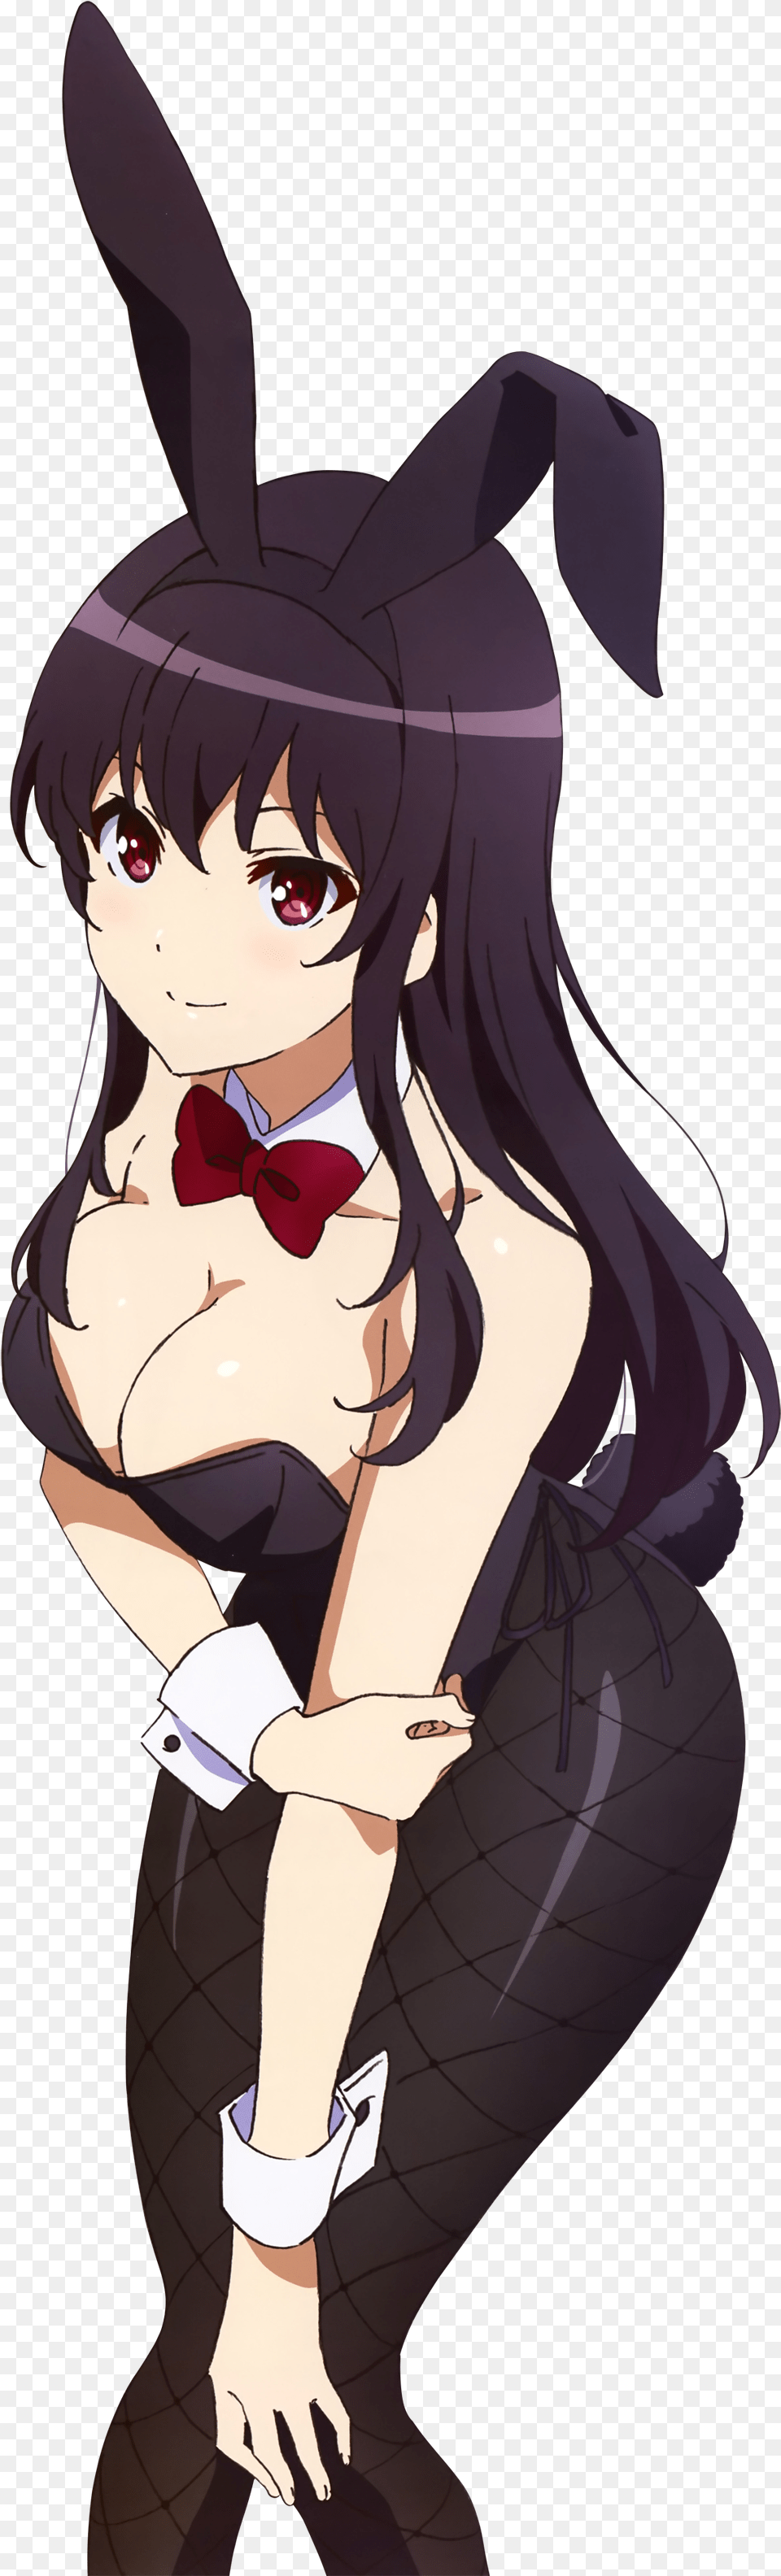 Download Anime Girl With Black Hair And Bunny Ears, Publication, Book, Comics, Adult Free Transparent Png